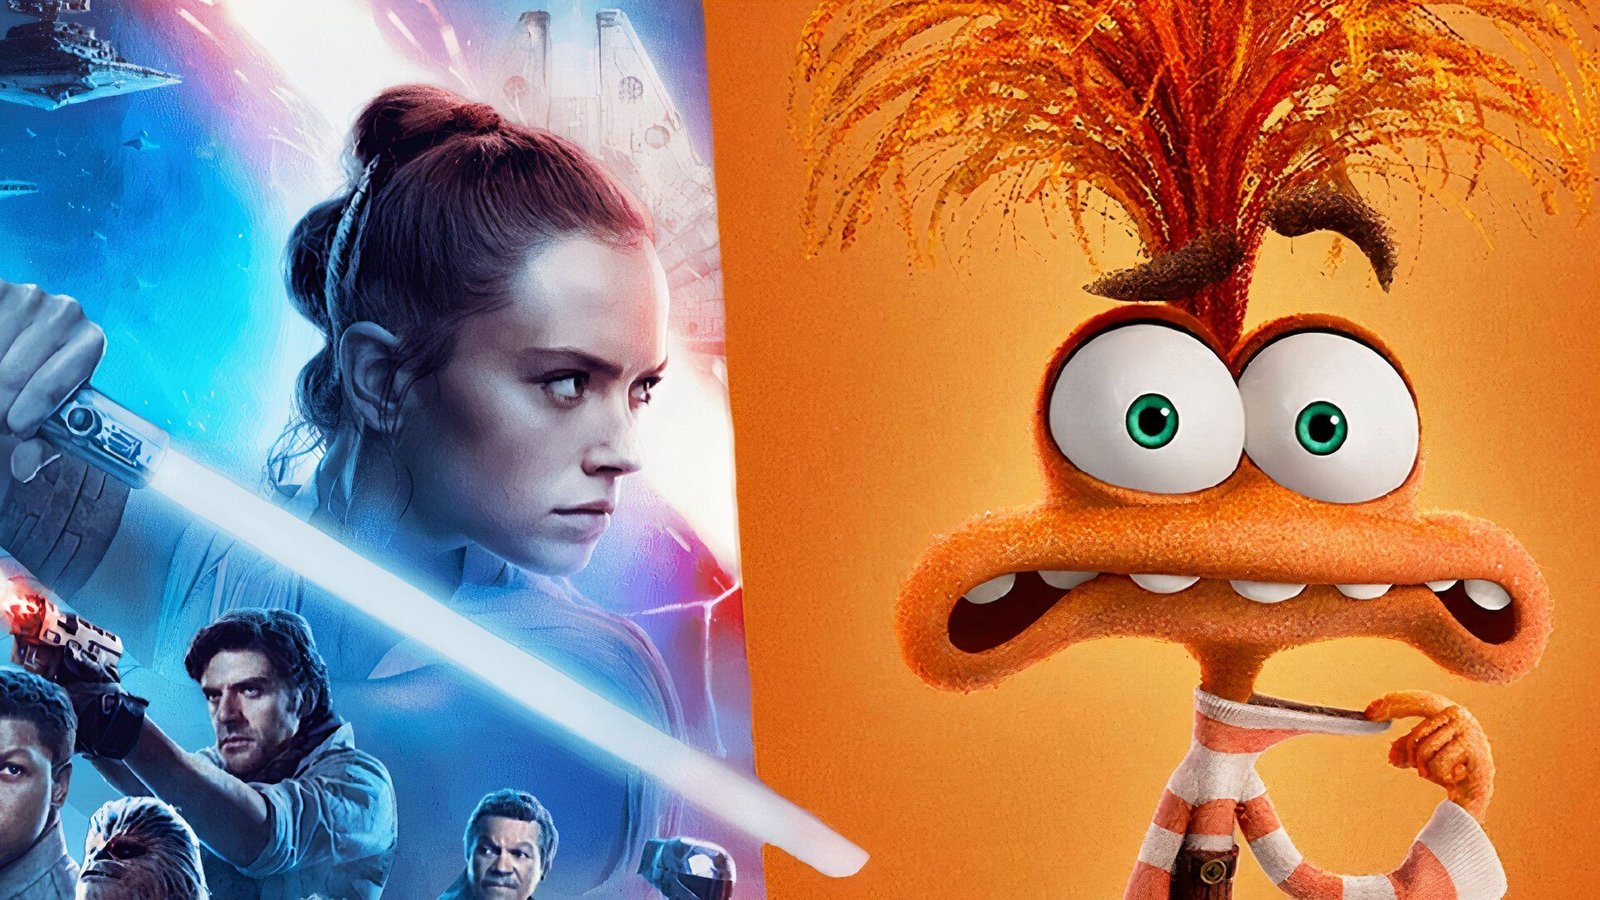 Star Wars Rise of Skywalker Booted from Disney's All-Time Domestic Top 10 by £1.2 Billion Pixar Smash Inside Out 2